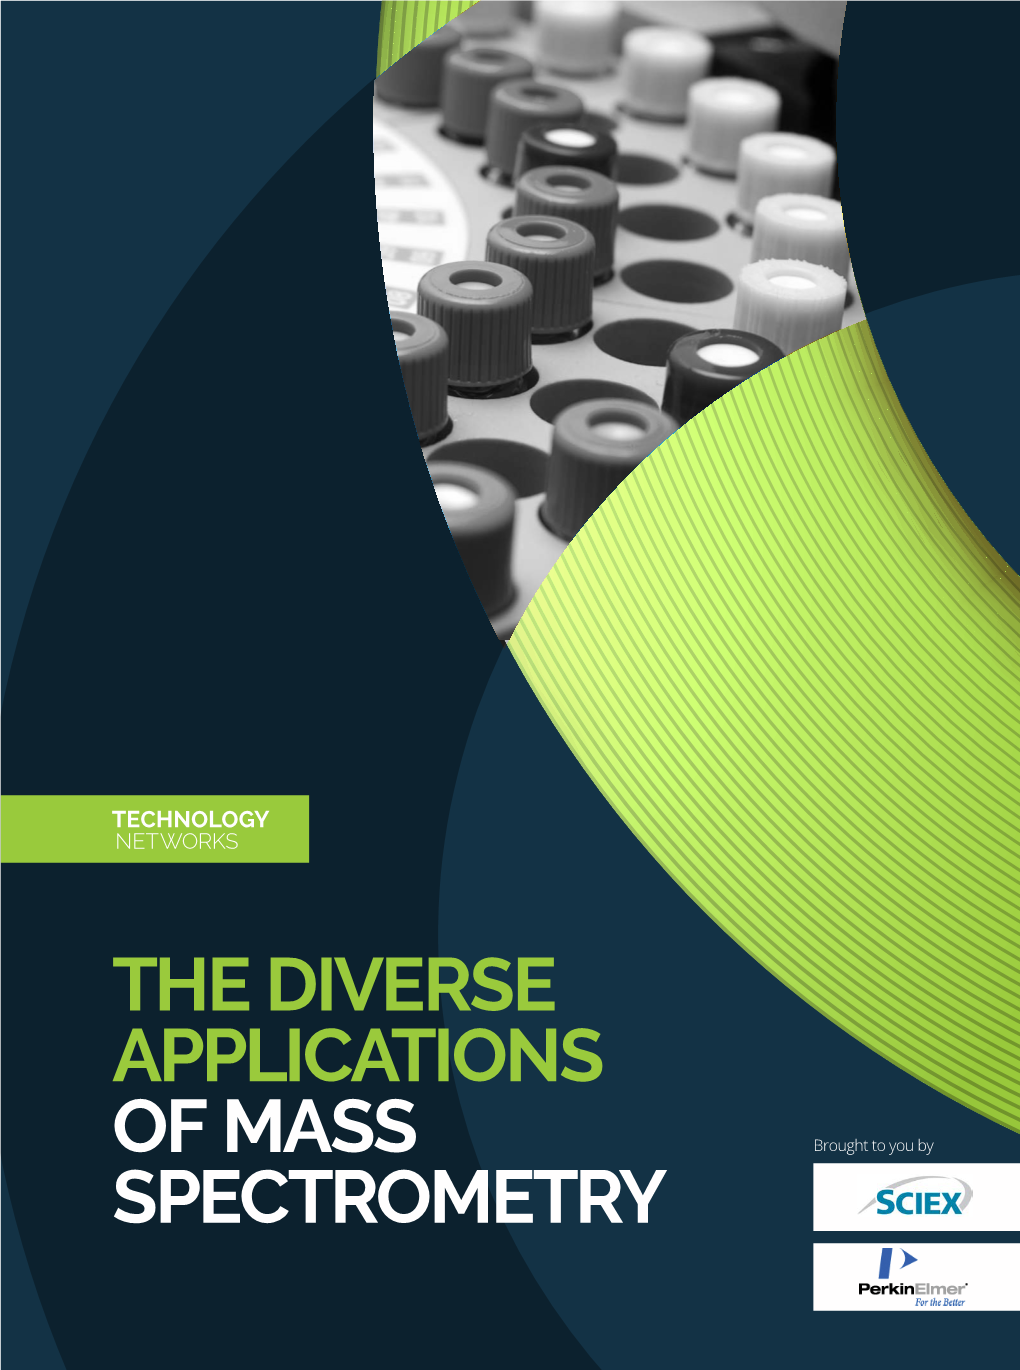 The Diverse Applications of Mass Spectrometry